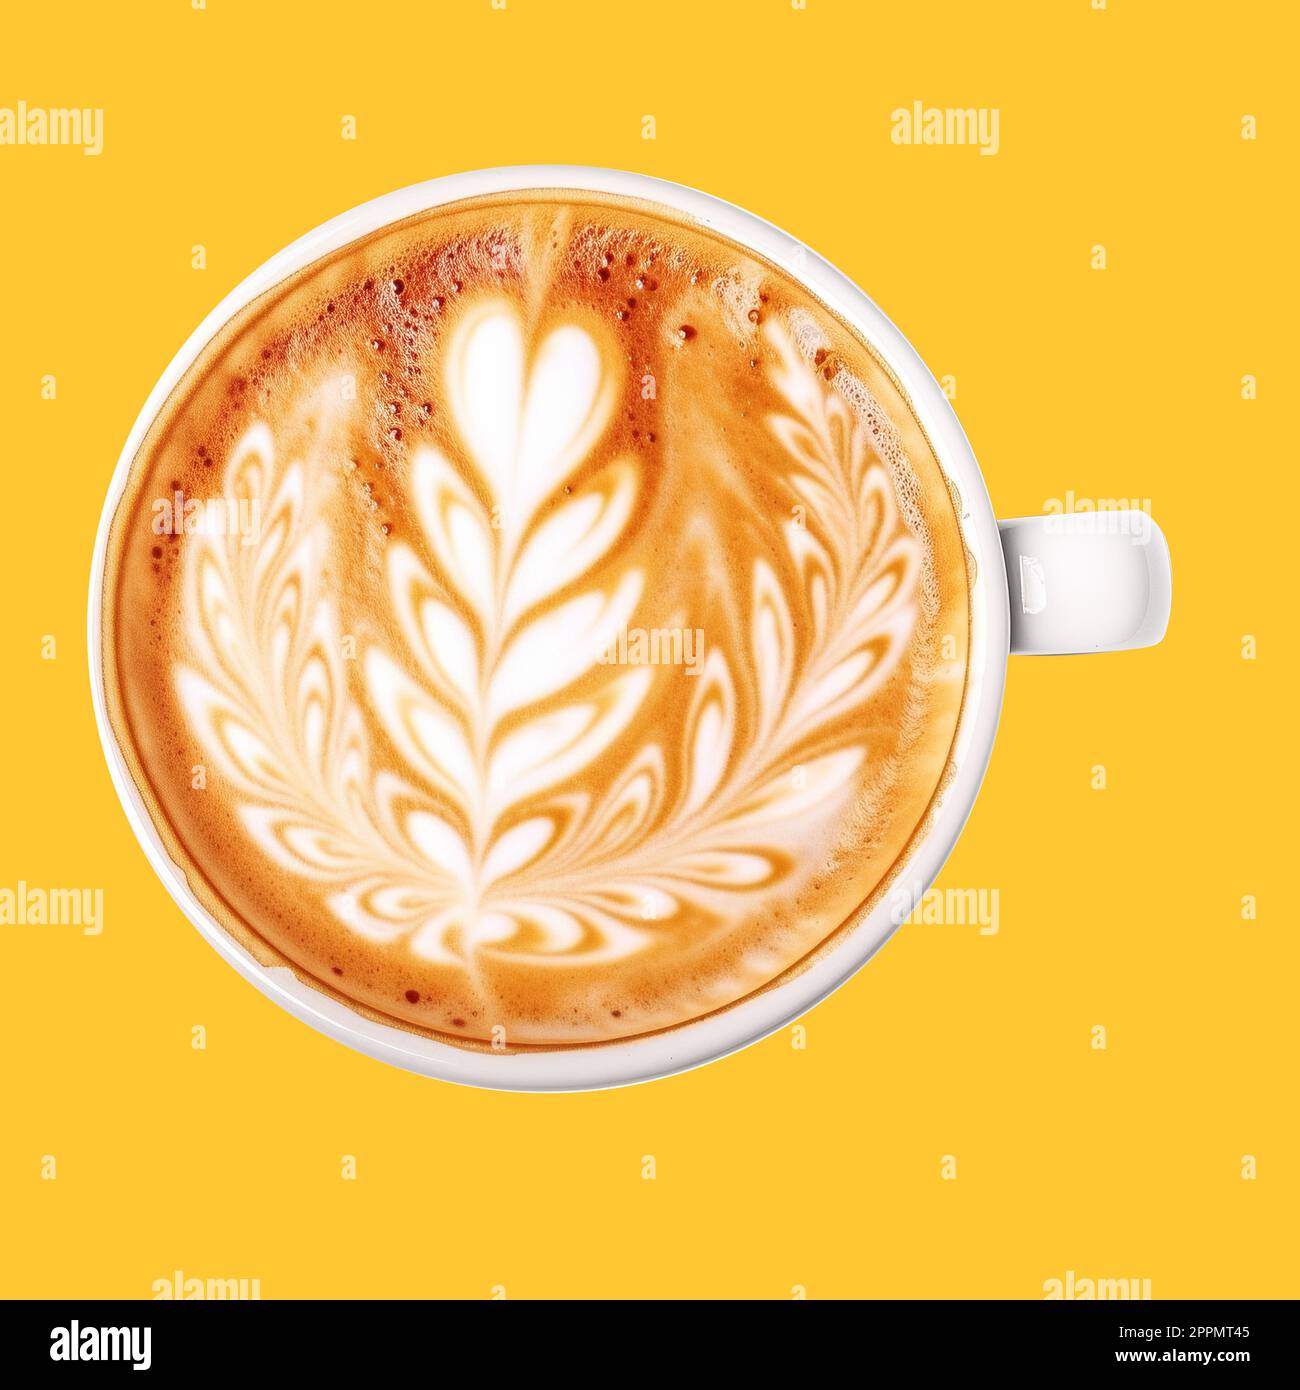 hot coffee cappuccino or latte coffee top view isolated on yellow background with clipping path Stock Photo